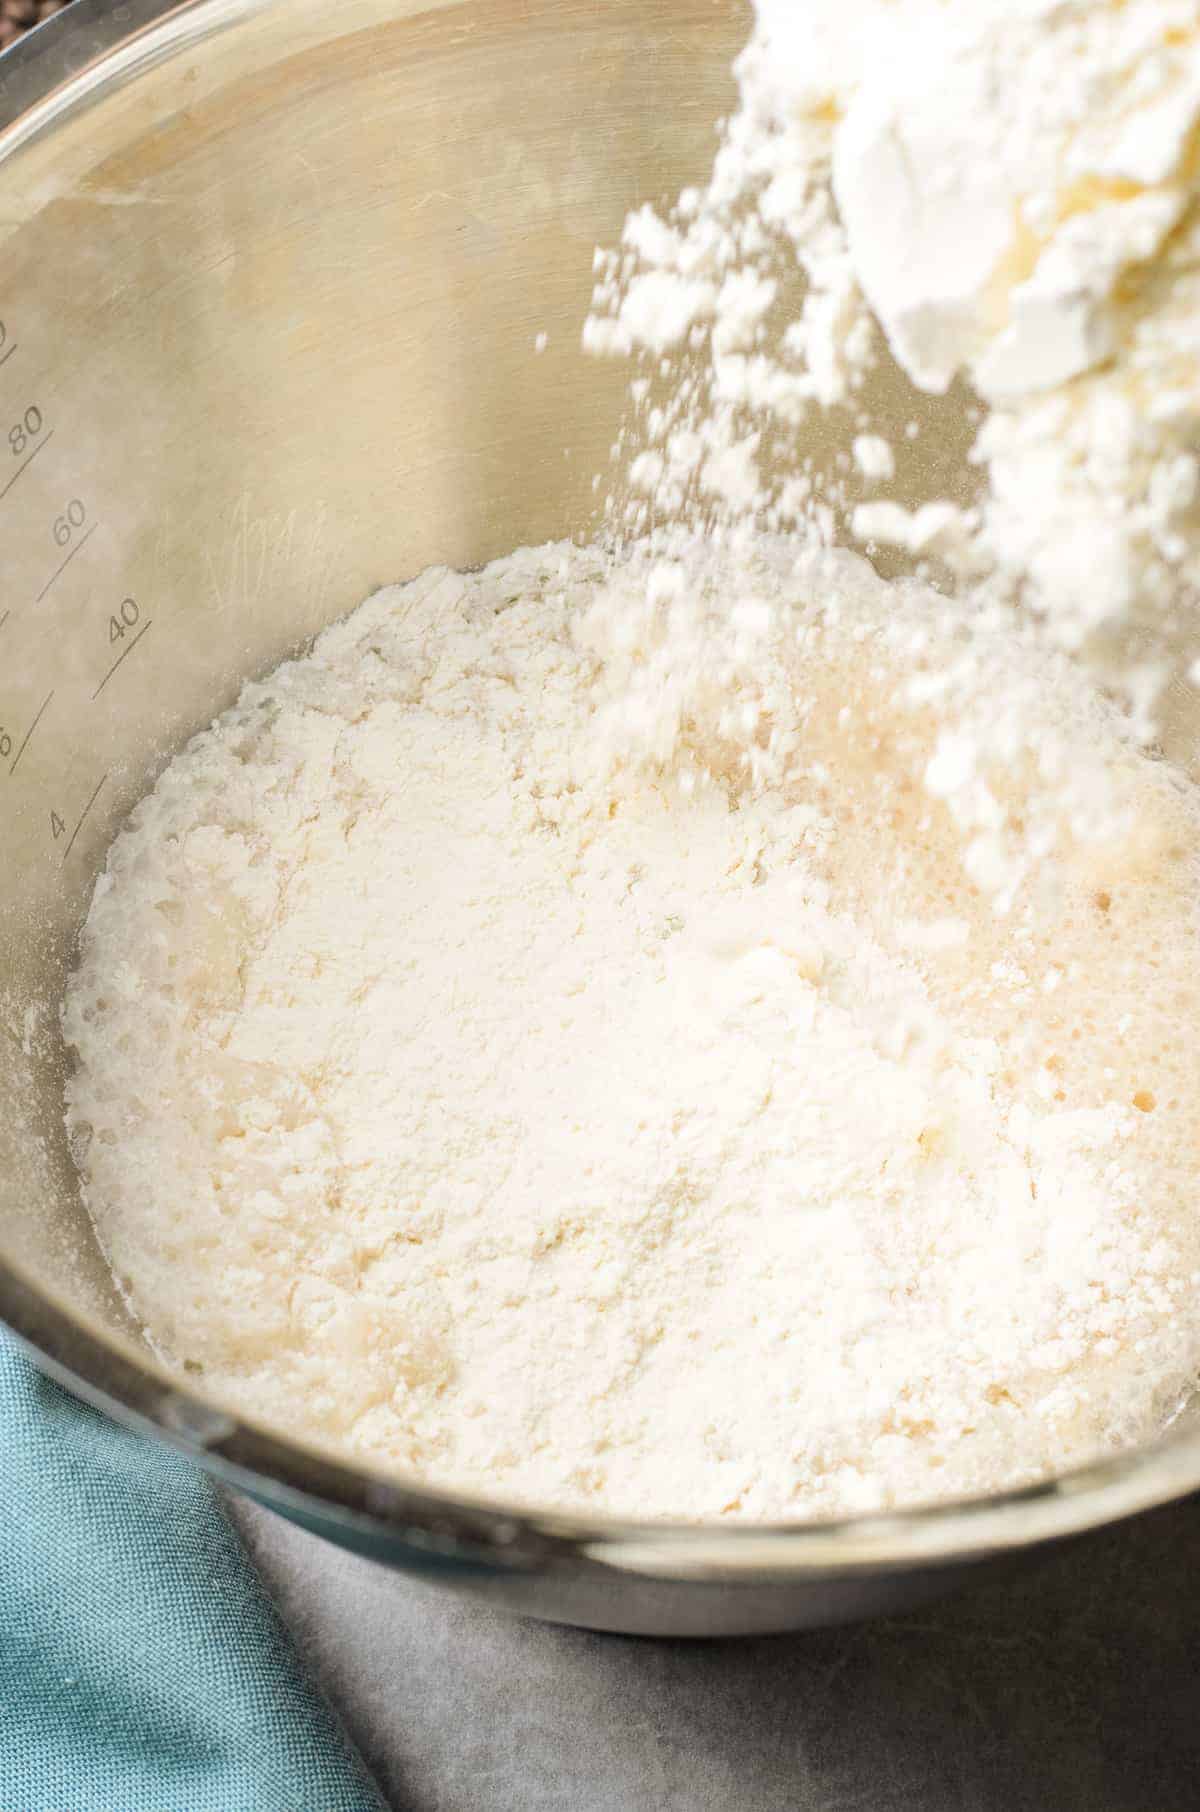 Mixing flour in mixing bowl for donuts